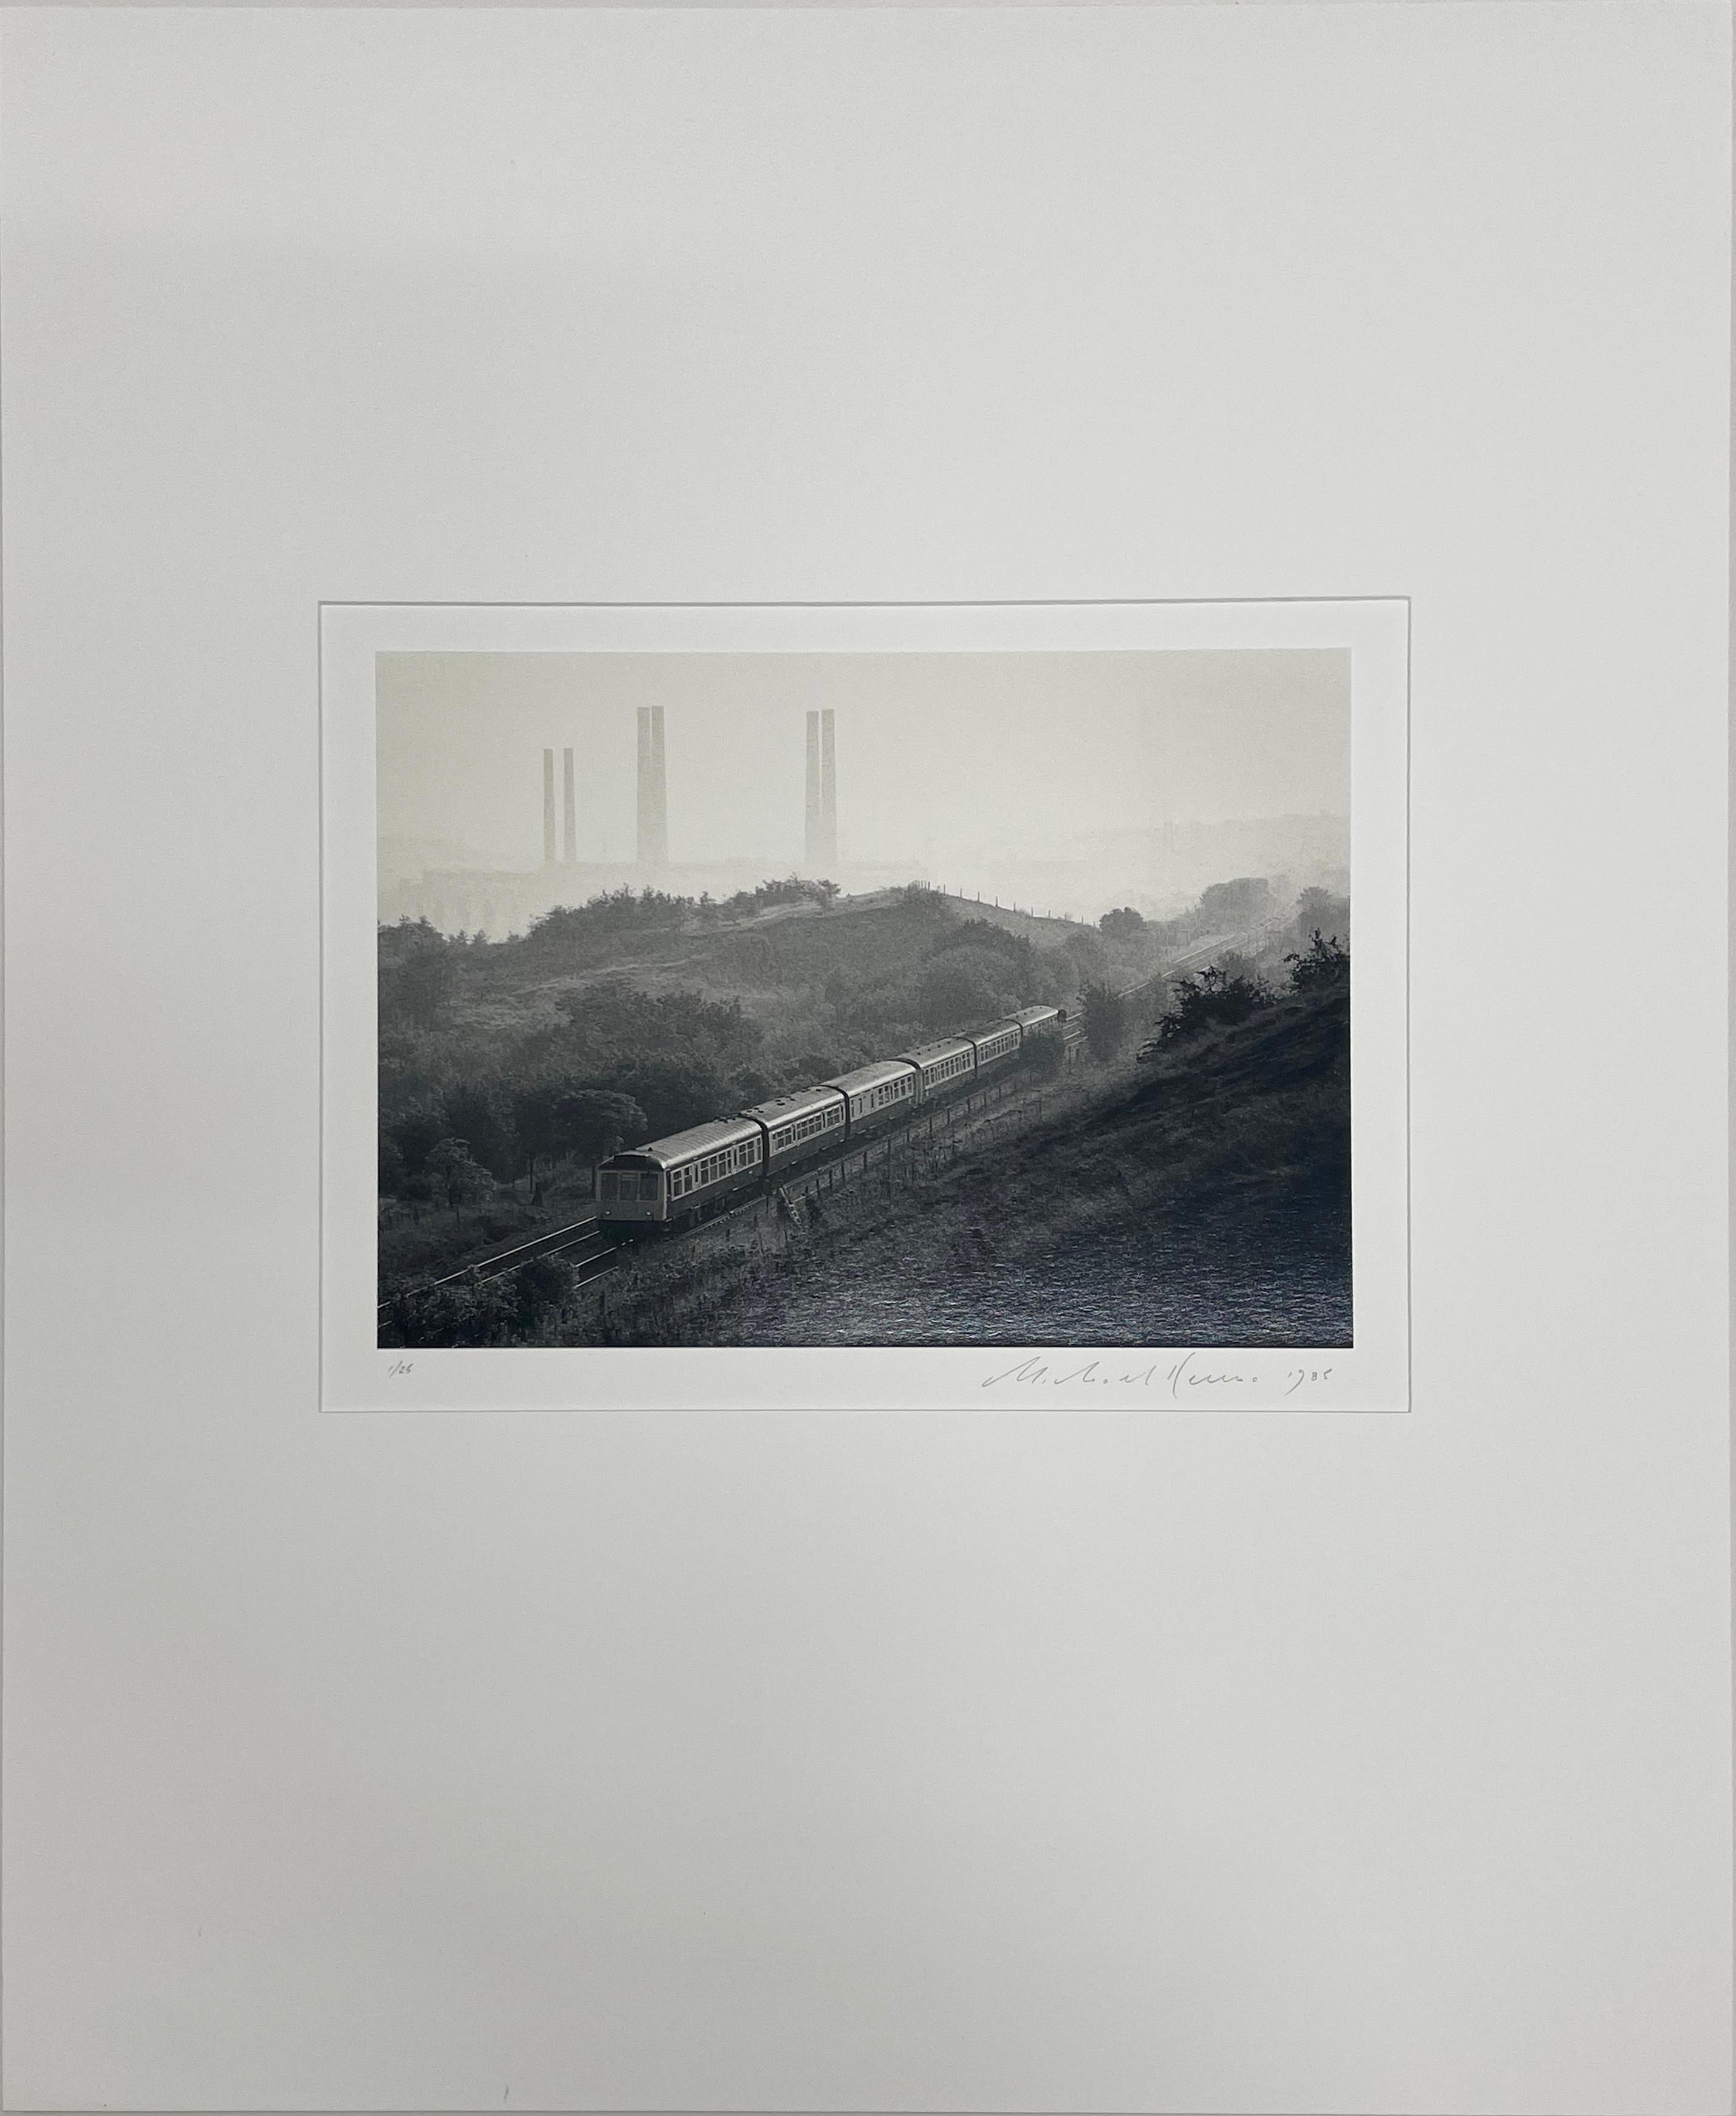 Diesel Train and Kearsley Power Station, Prestolee, Greater Manchester, England - Photograph by Michael Kenna